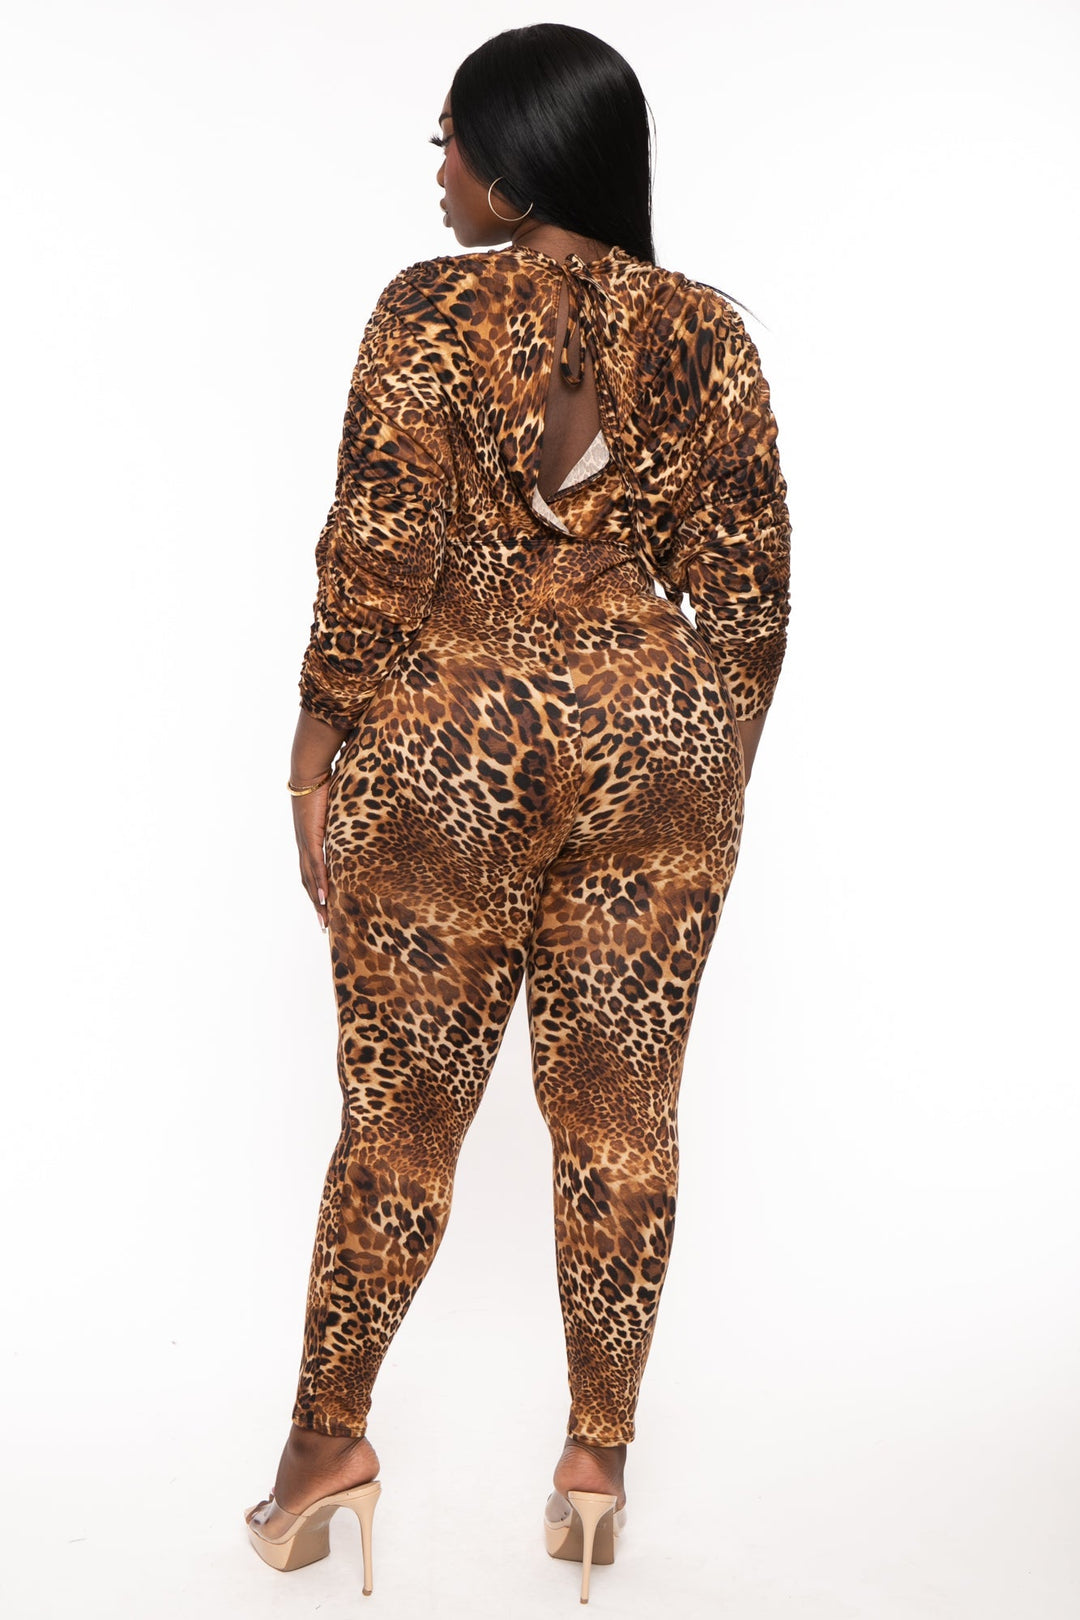 Goodtime USA Jumpsuits and Rompers Plus Size Wild About It Leopard Jumpsuit - Brown